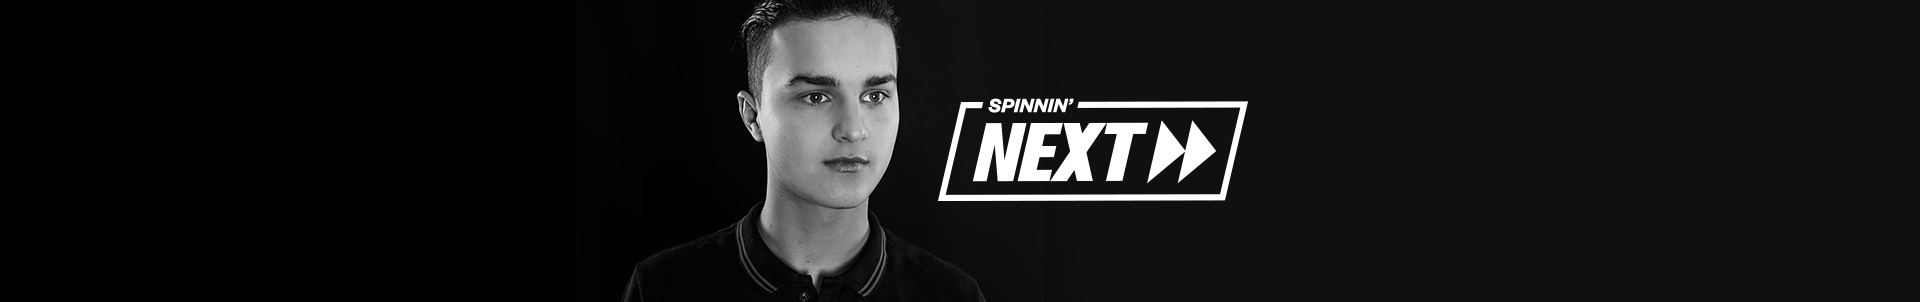 Spinnin' Records wants you to finish a track